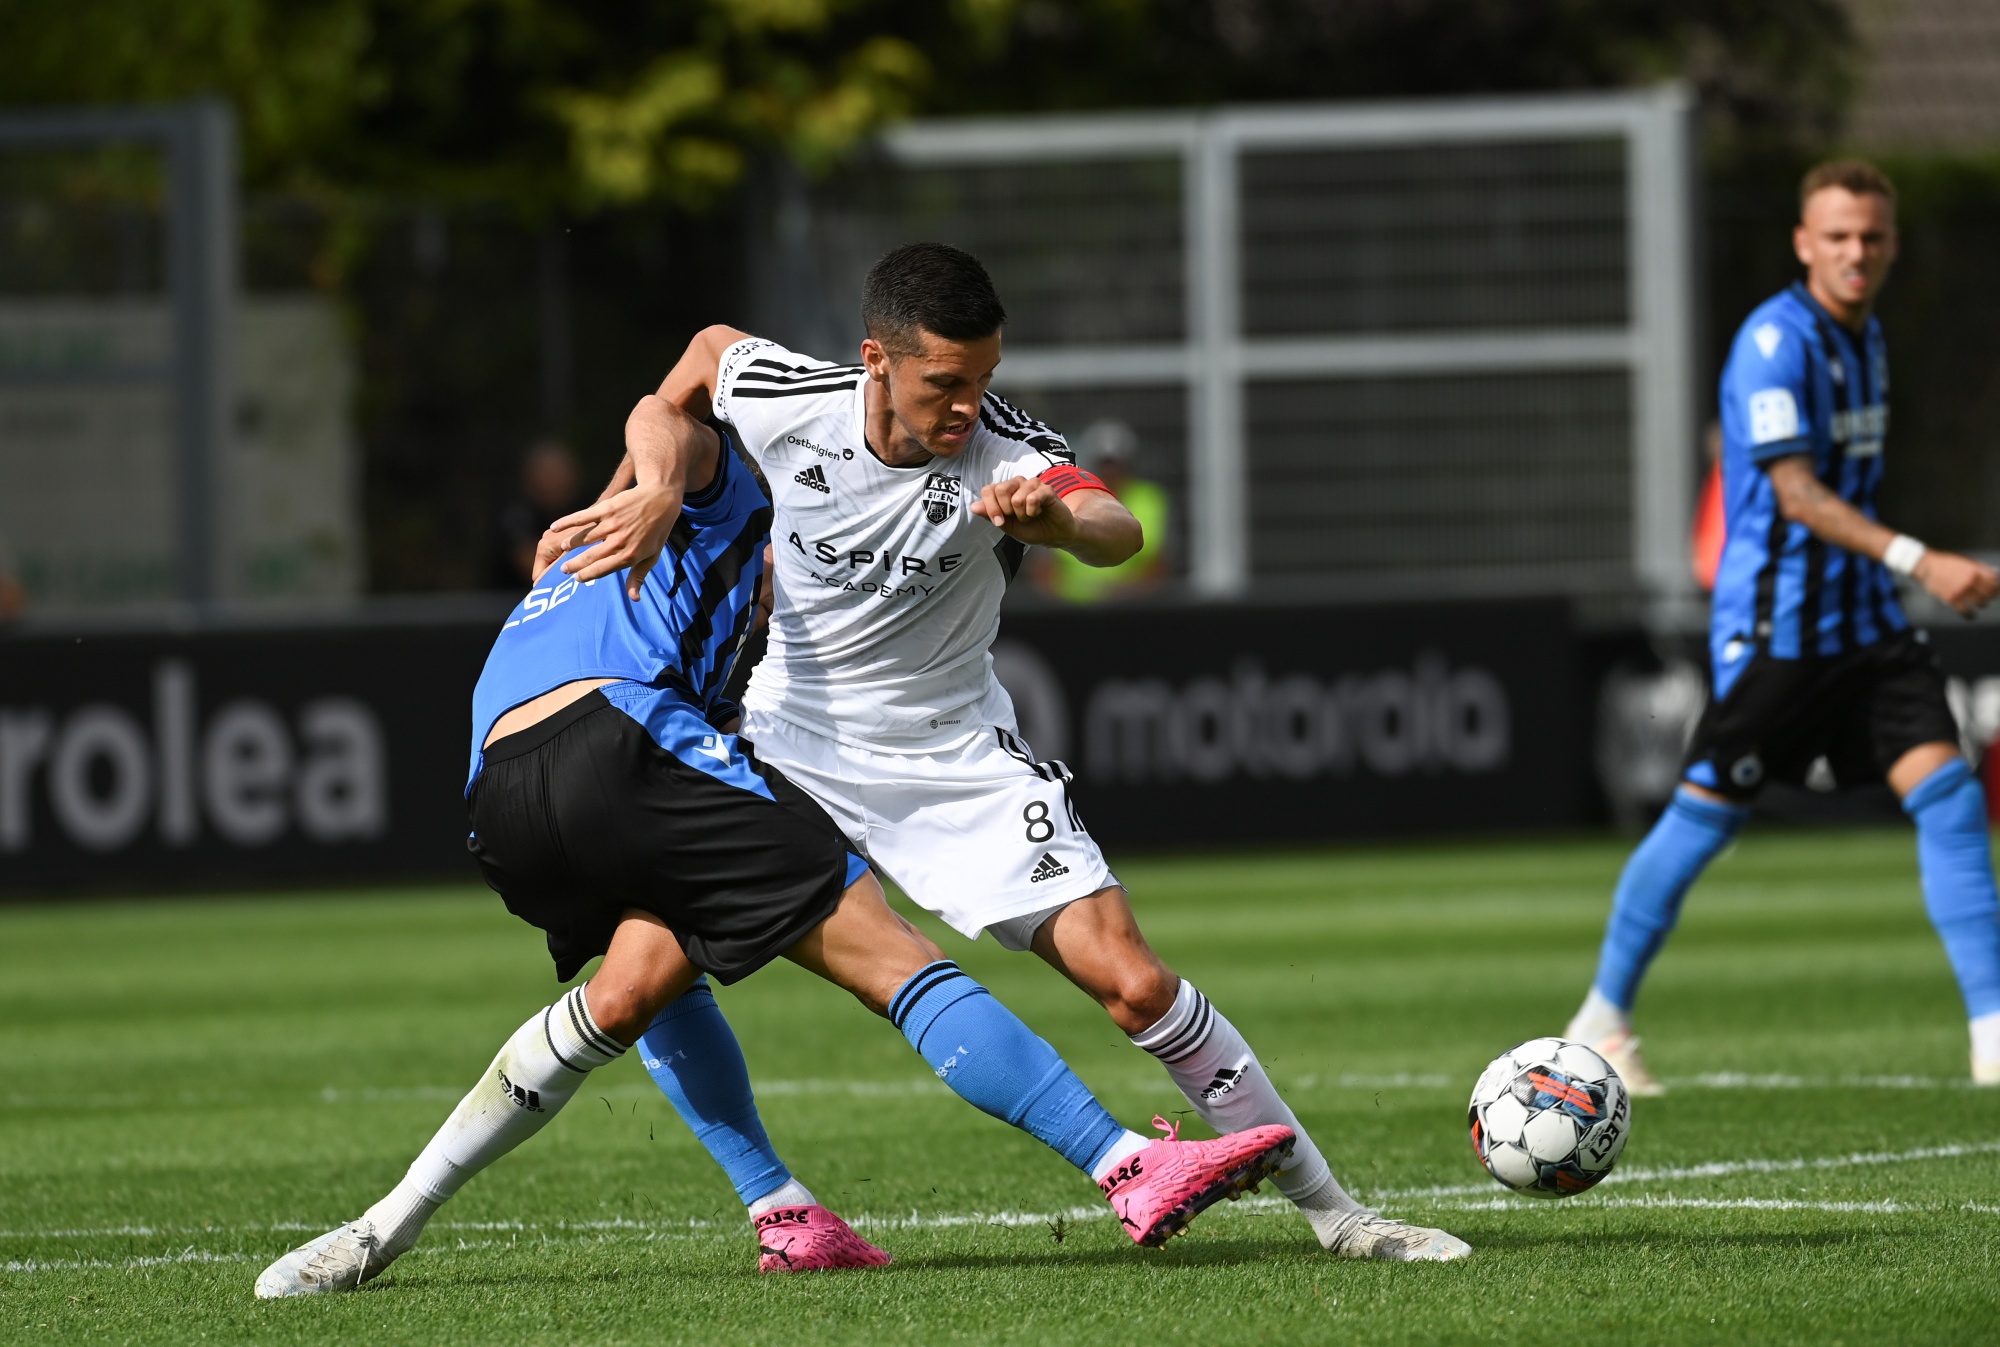 Club's Casper Nielsen and Eupen's Stef Peeters fight for the ball during a soccer match between KAS Eupen and Club Brugge KV, Sunday 31 July 2022 in Eupen, on day 2 of the 2022-2023 'Jupiler Pro League' first division of the Belgian championship. BELGA PHOTO JOHN THYS